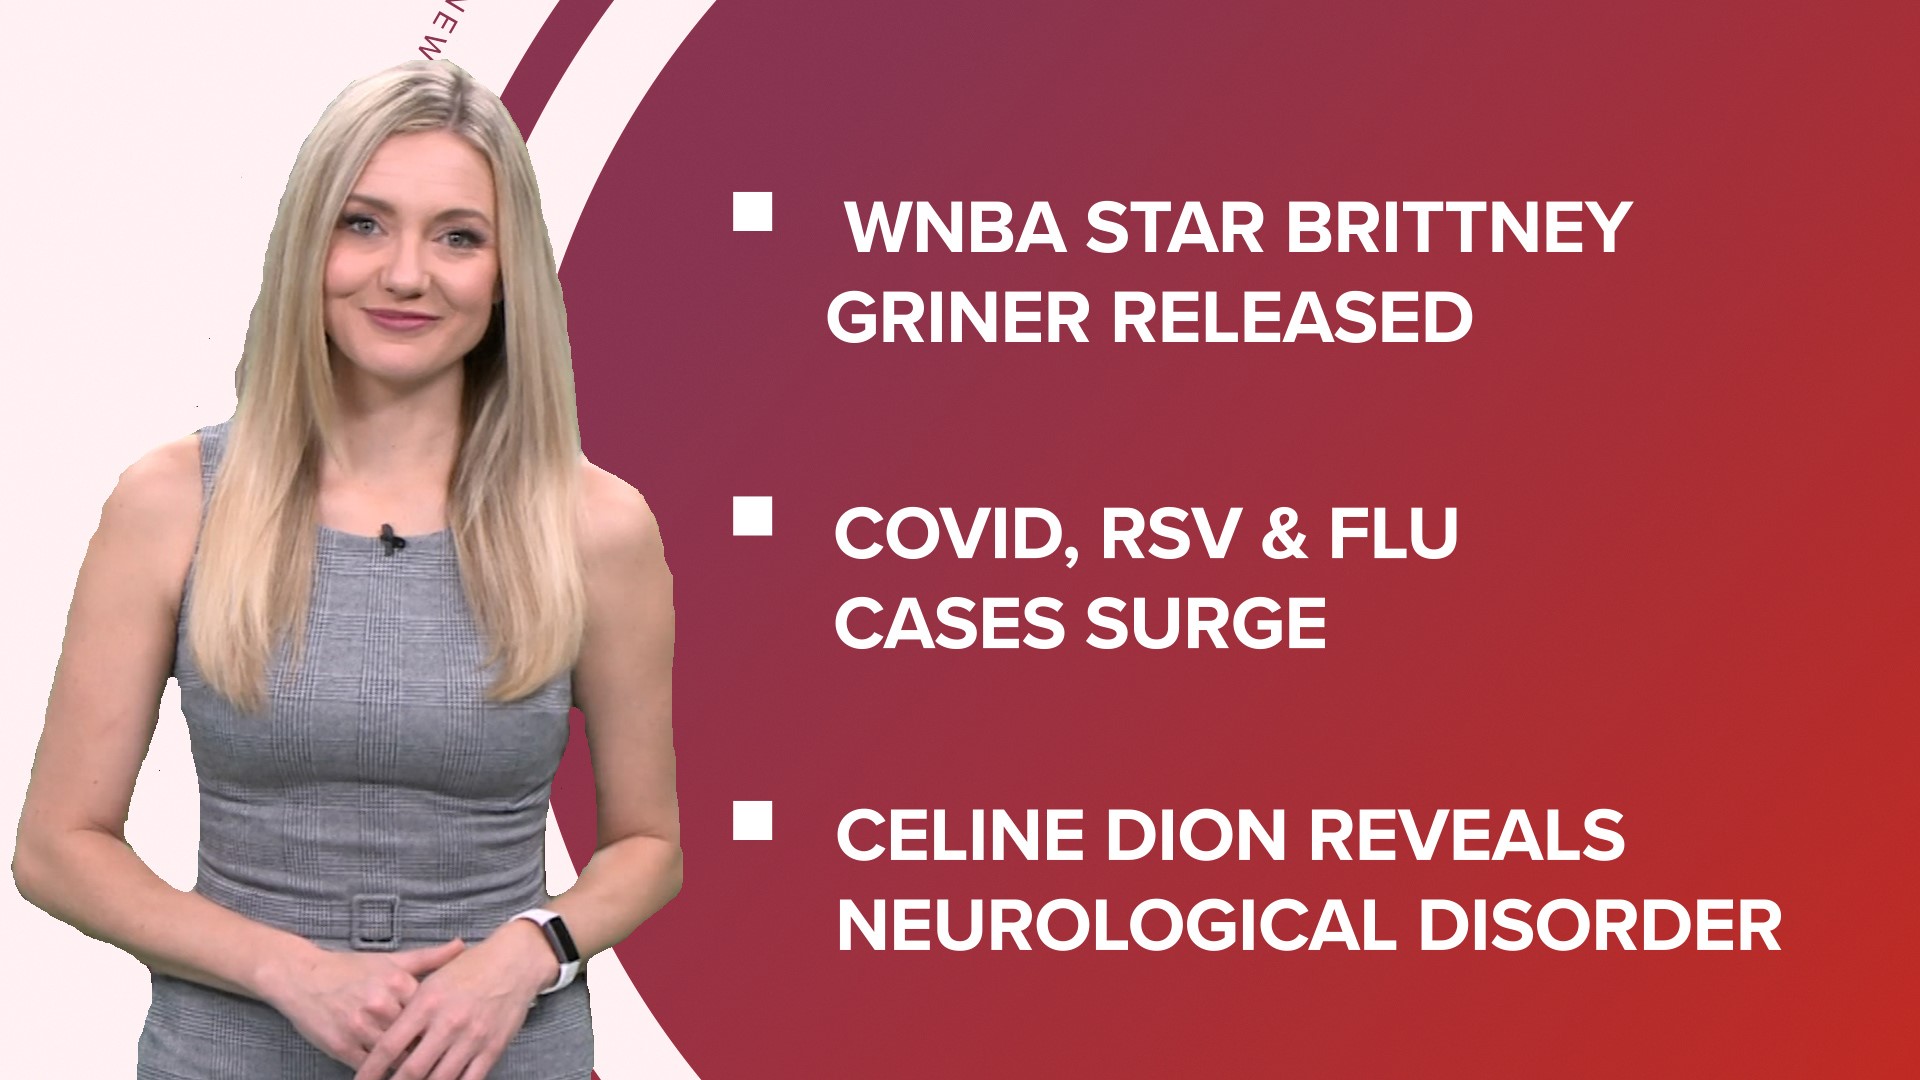 A look at what is happening in the news from the release of Brittney in a prisoner swap to respiratory illnesses surging and Celine Dion's diagnosis.